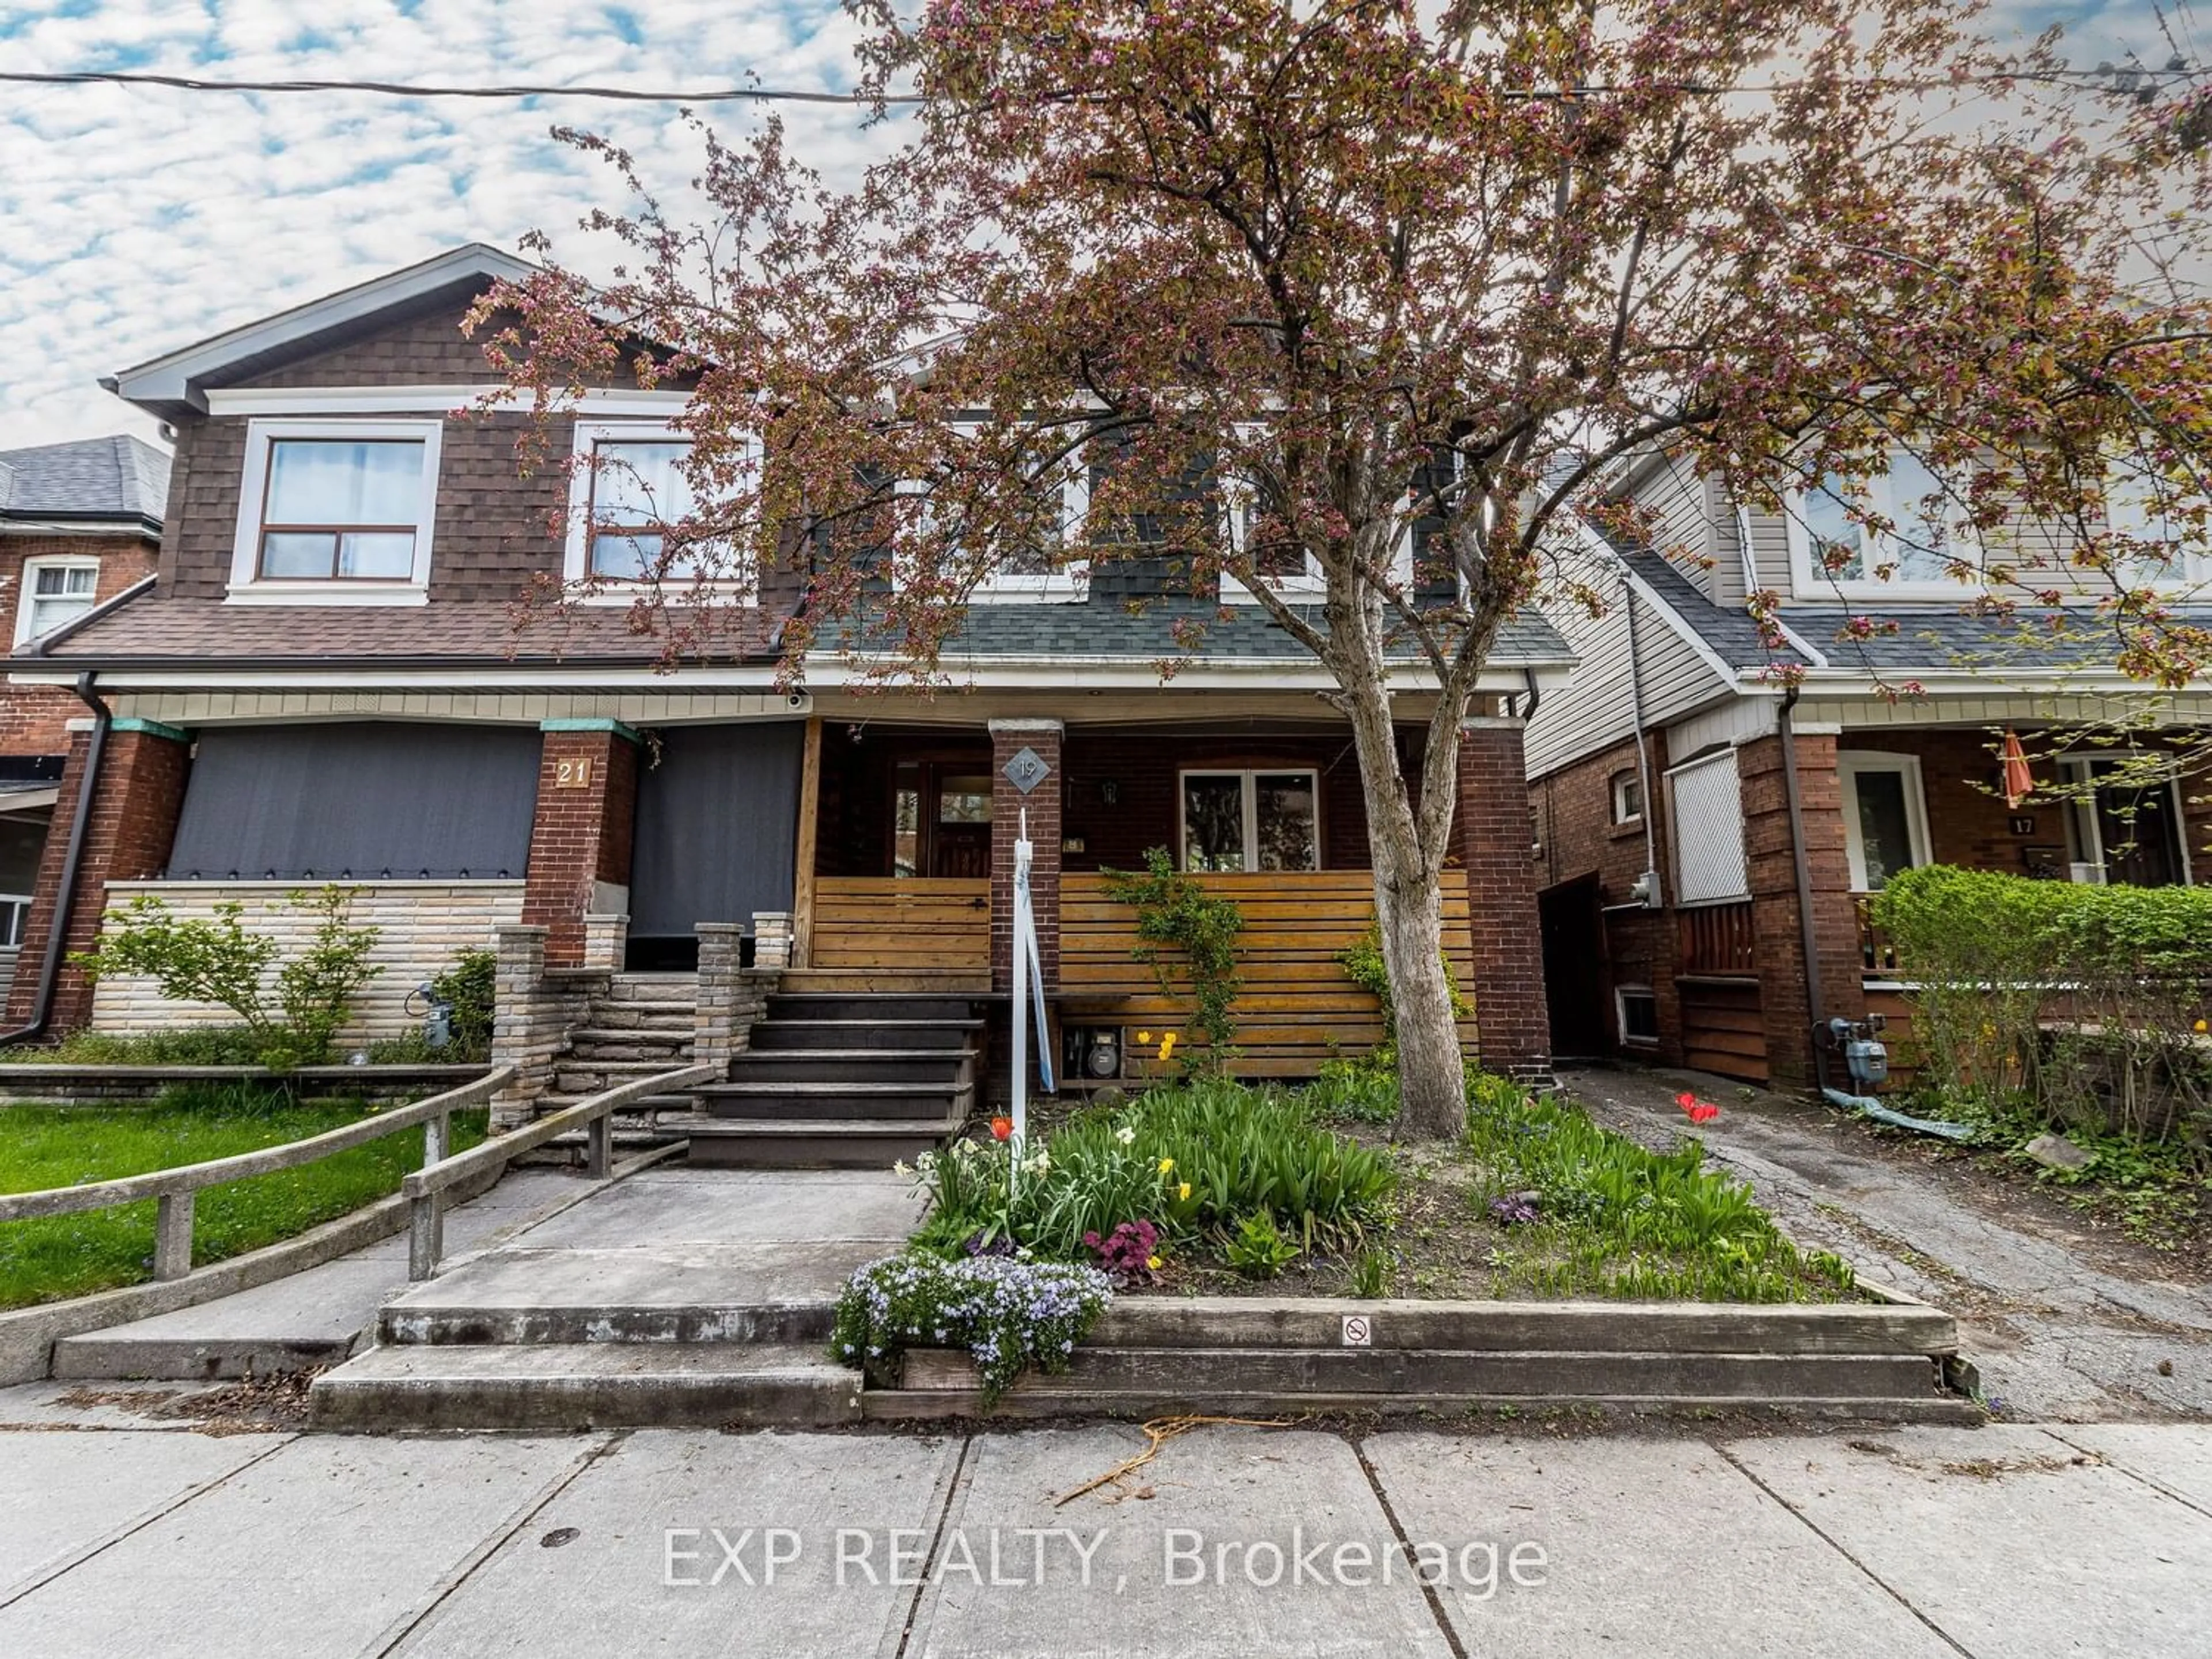 Frontside or backside of a home for 19 Phin Ave, Toronto Ontario M4J 3T1